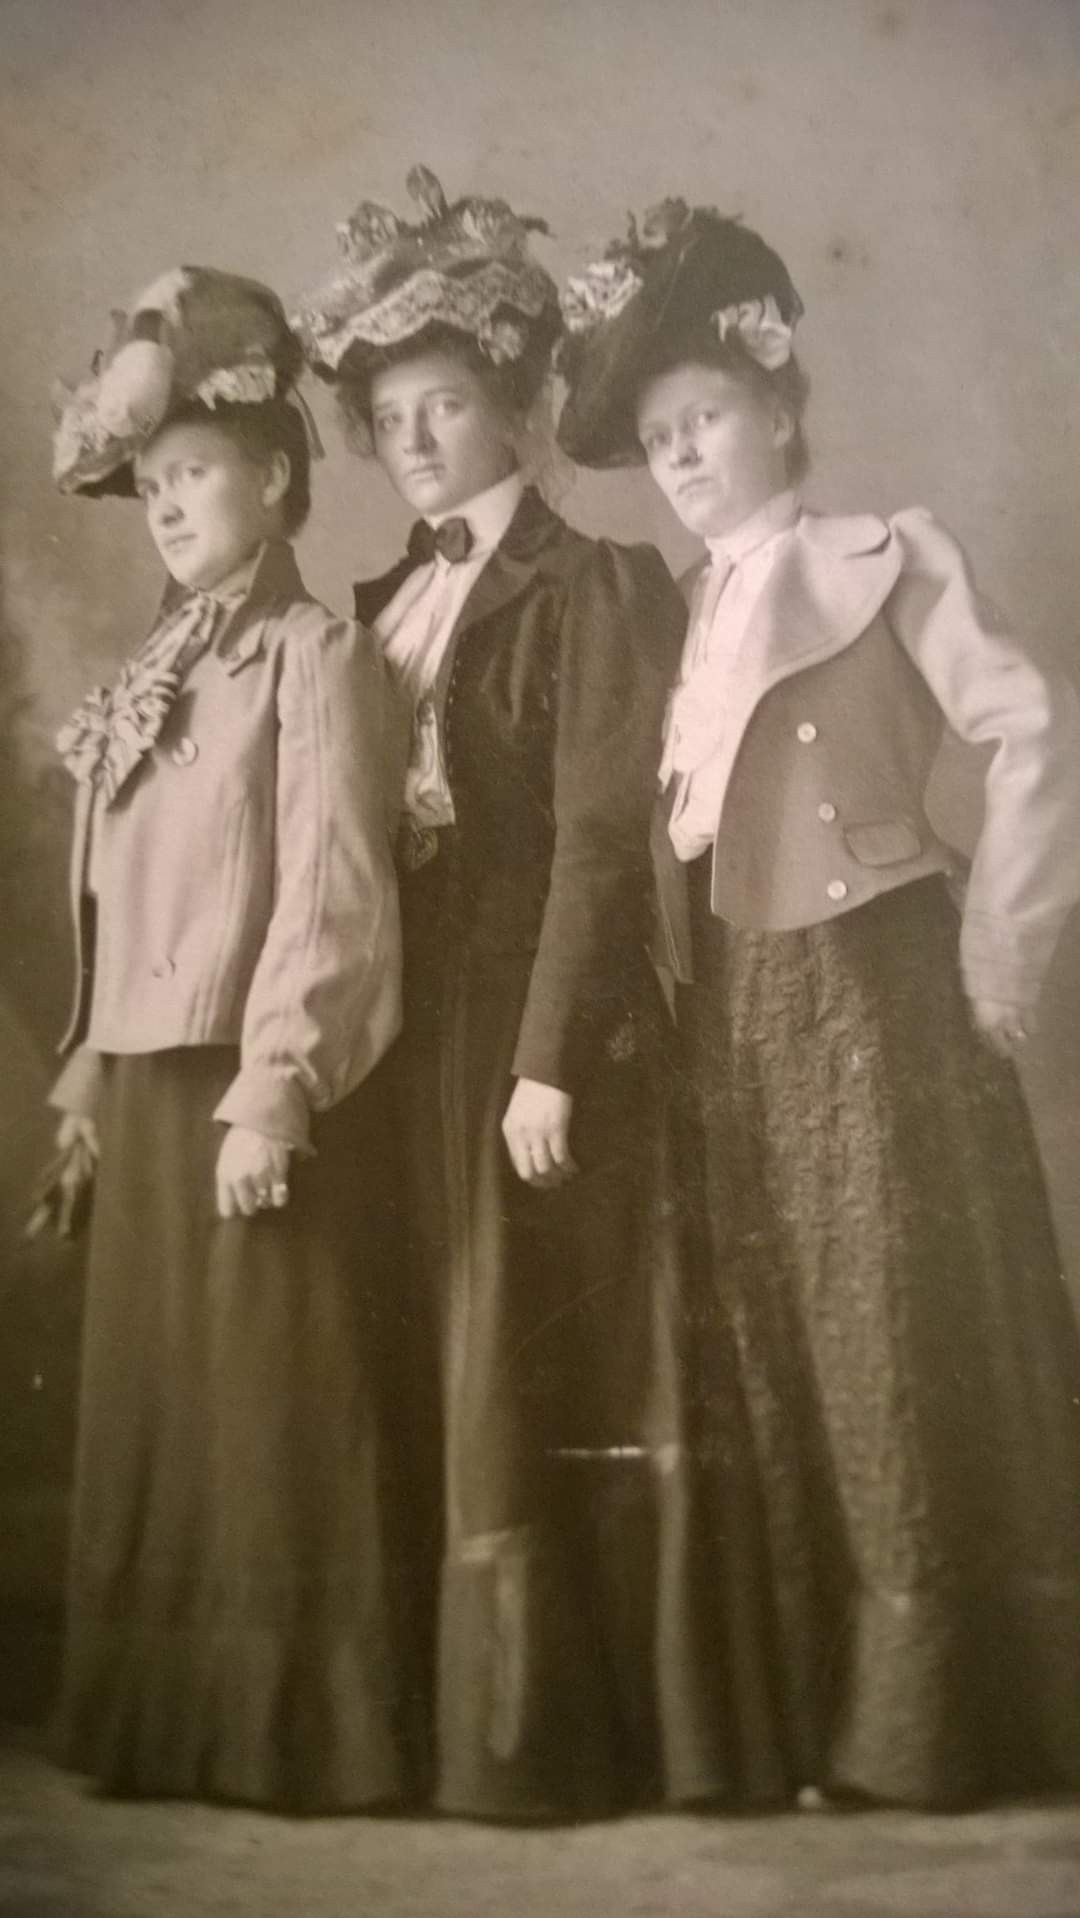 Three sisters - one was a milliner 
Distant cousins of mine